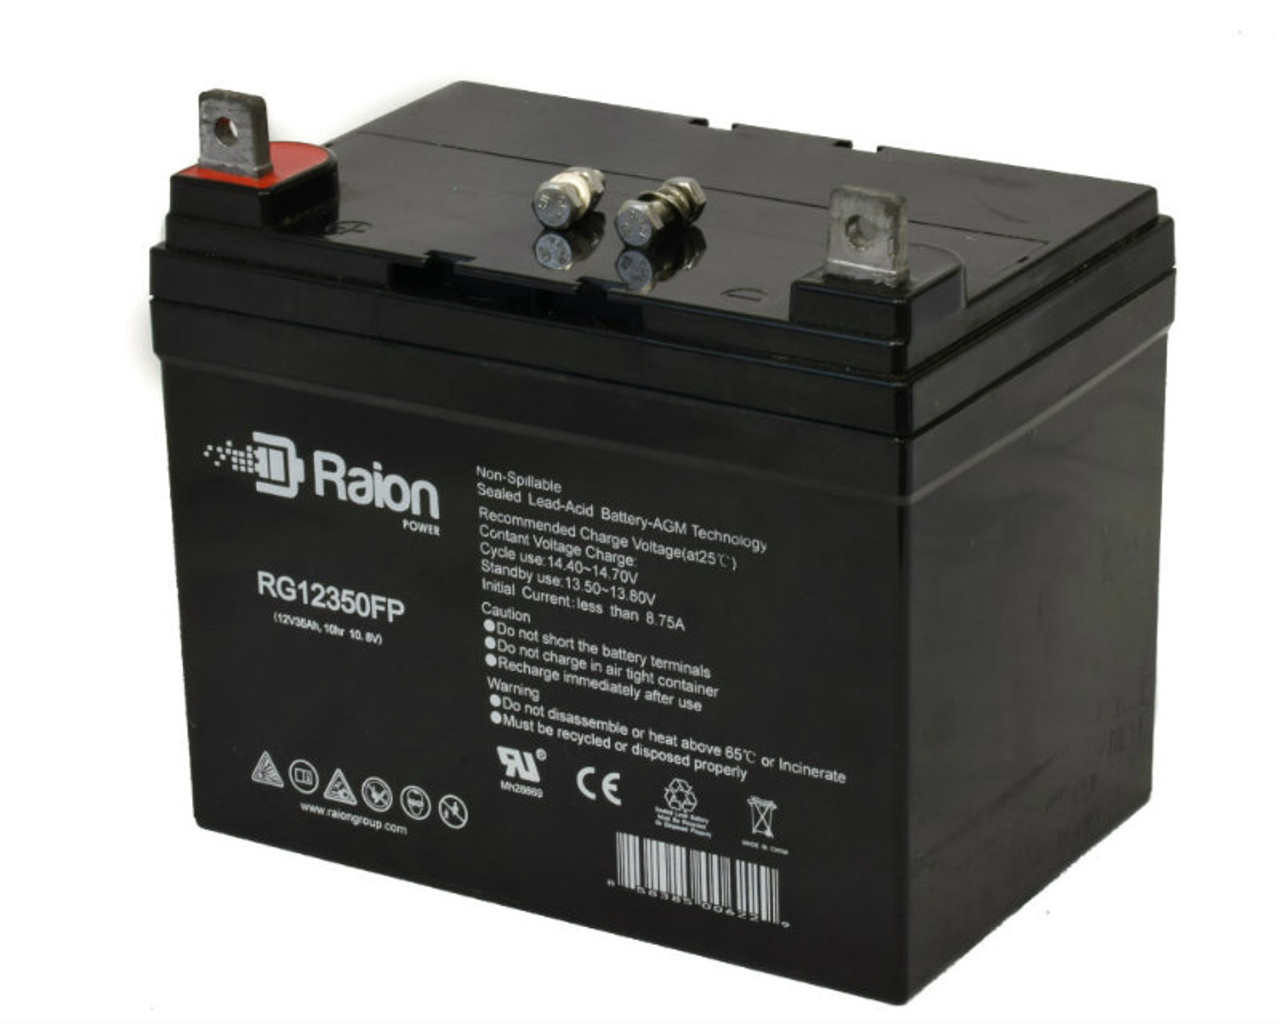 Raion Power Replacement 12V 35Ah RG12350FP Mobility Scooter Battery for Quickie P110 (14 inches wide)